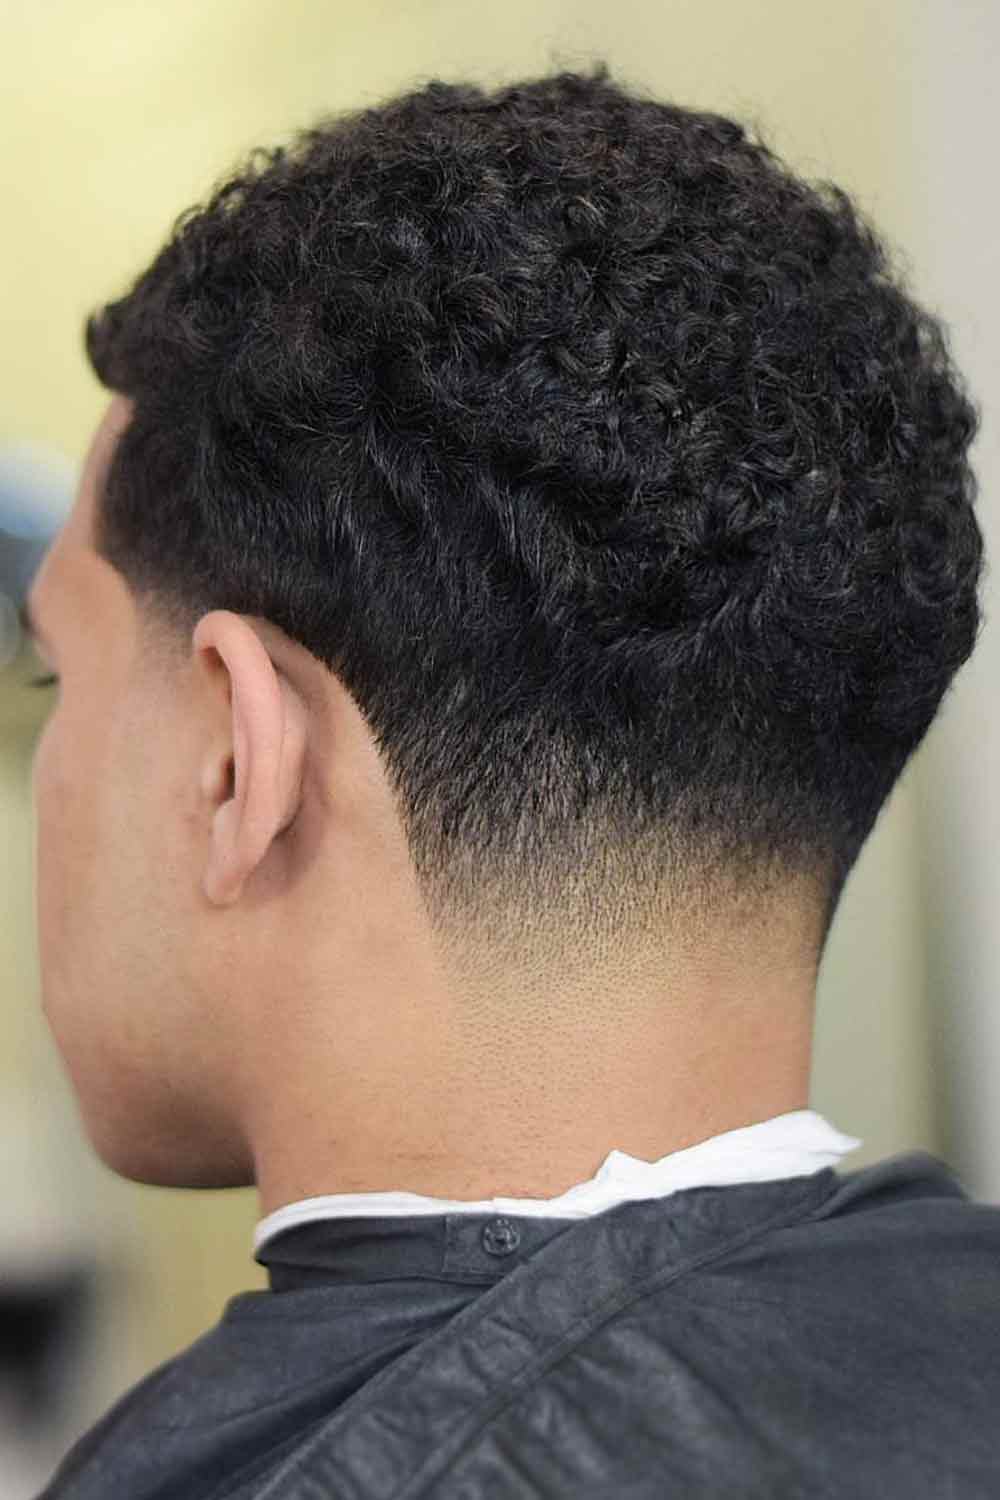 Low Taper Fade Curly Haircut #taperfadecurlyhair #taperfade #curlyhair #taper #fade